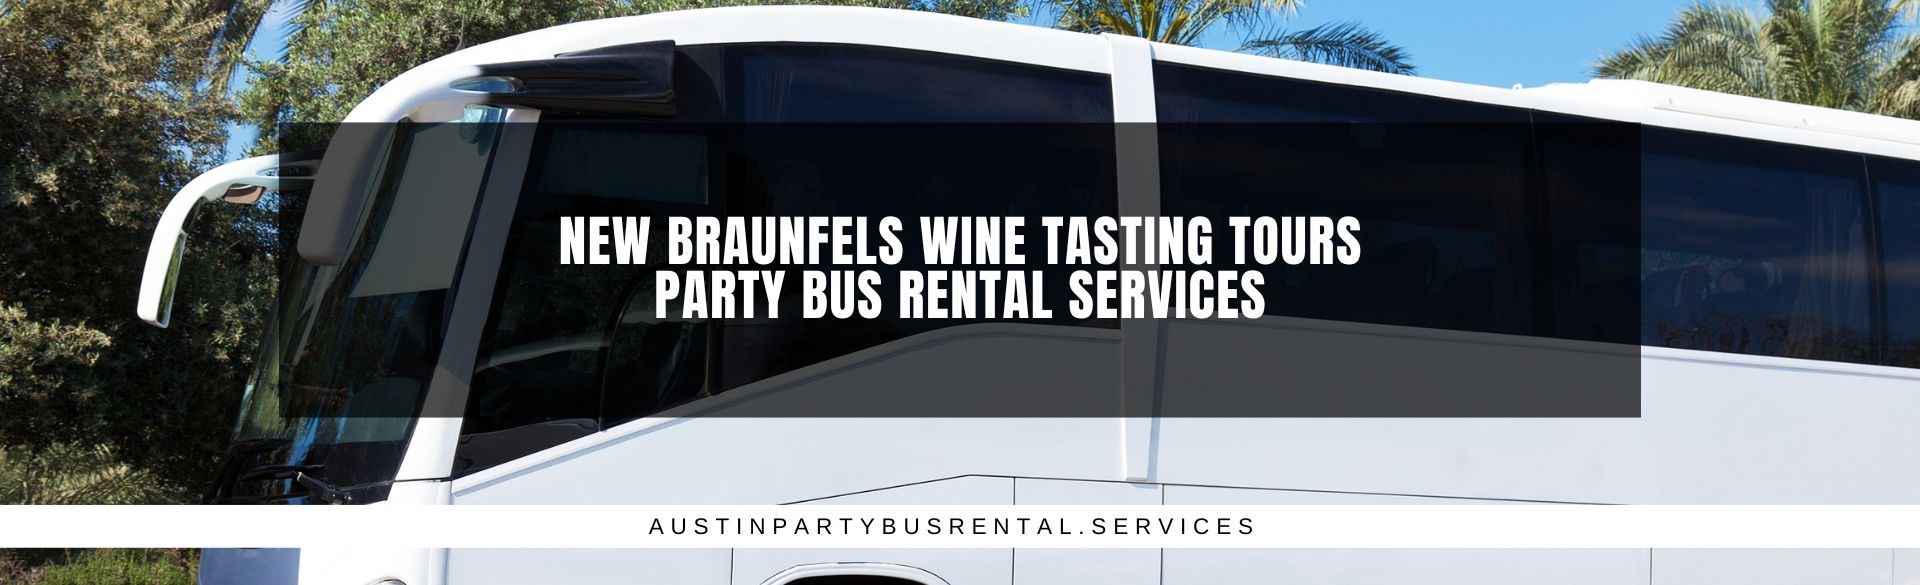 New Braunfels Wine Tasting Tours Party Bus Rental Services